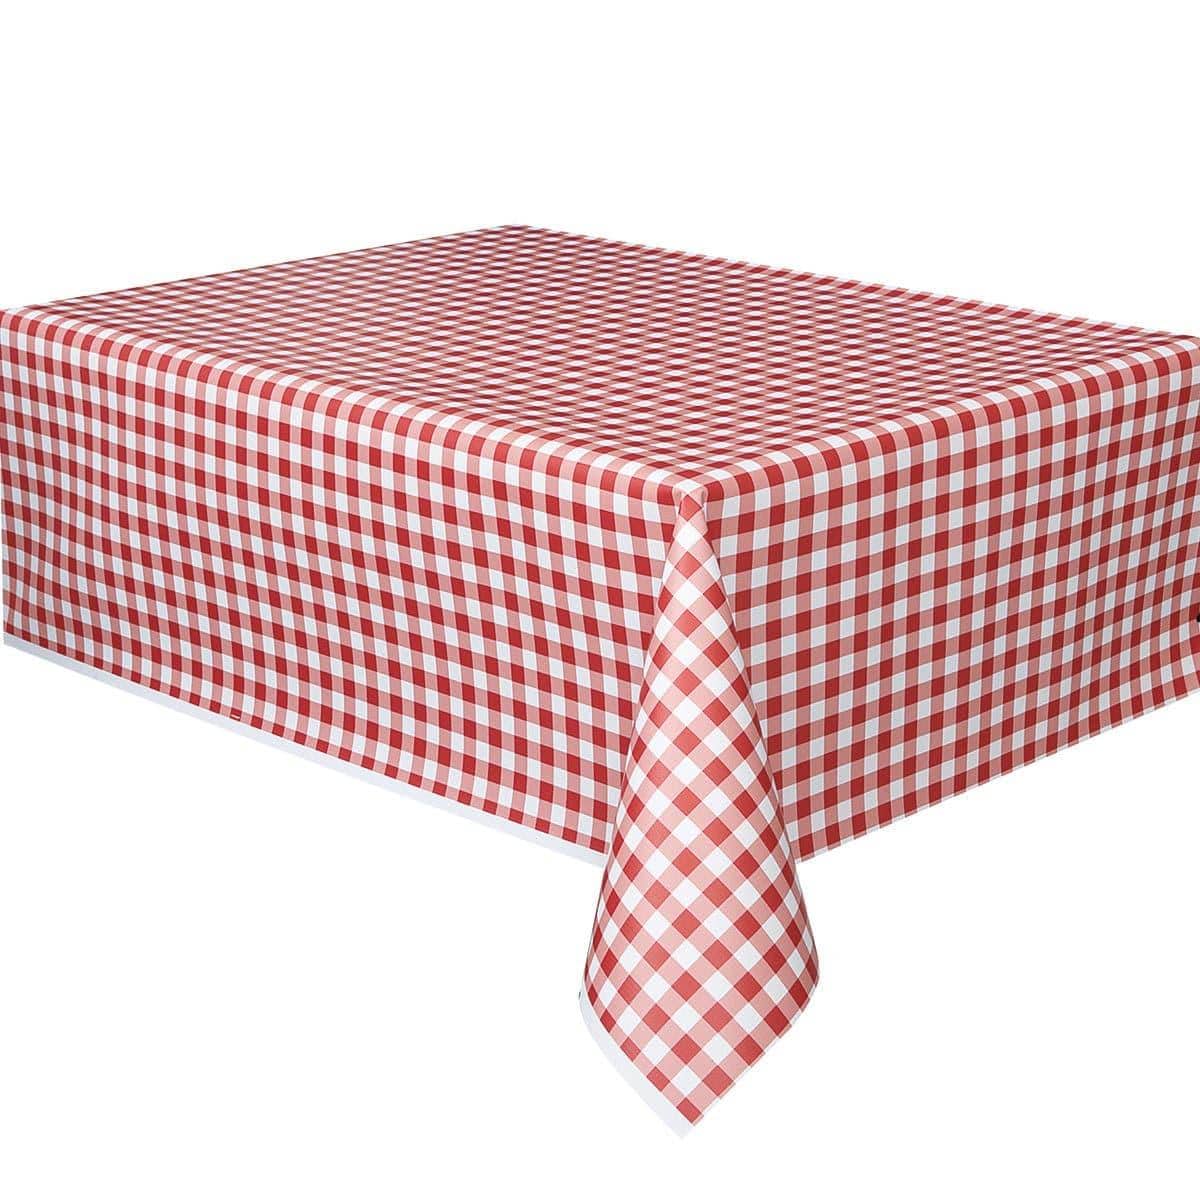 Buy Everyday Entertaining Red Gingham Plastic Tablecover sold at Party Expert